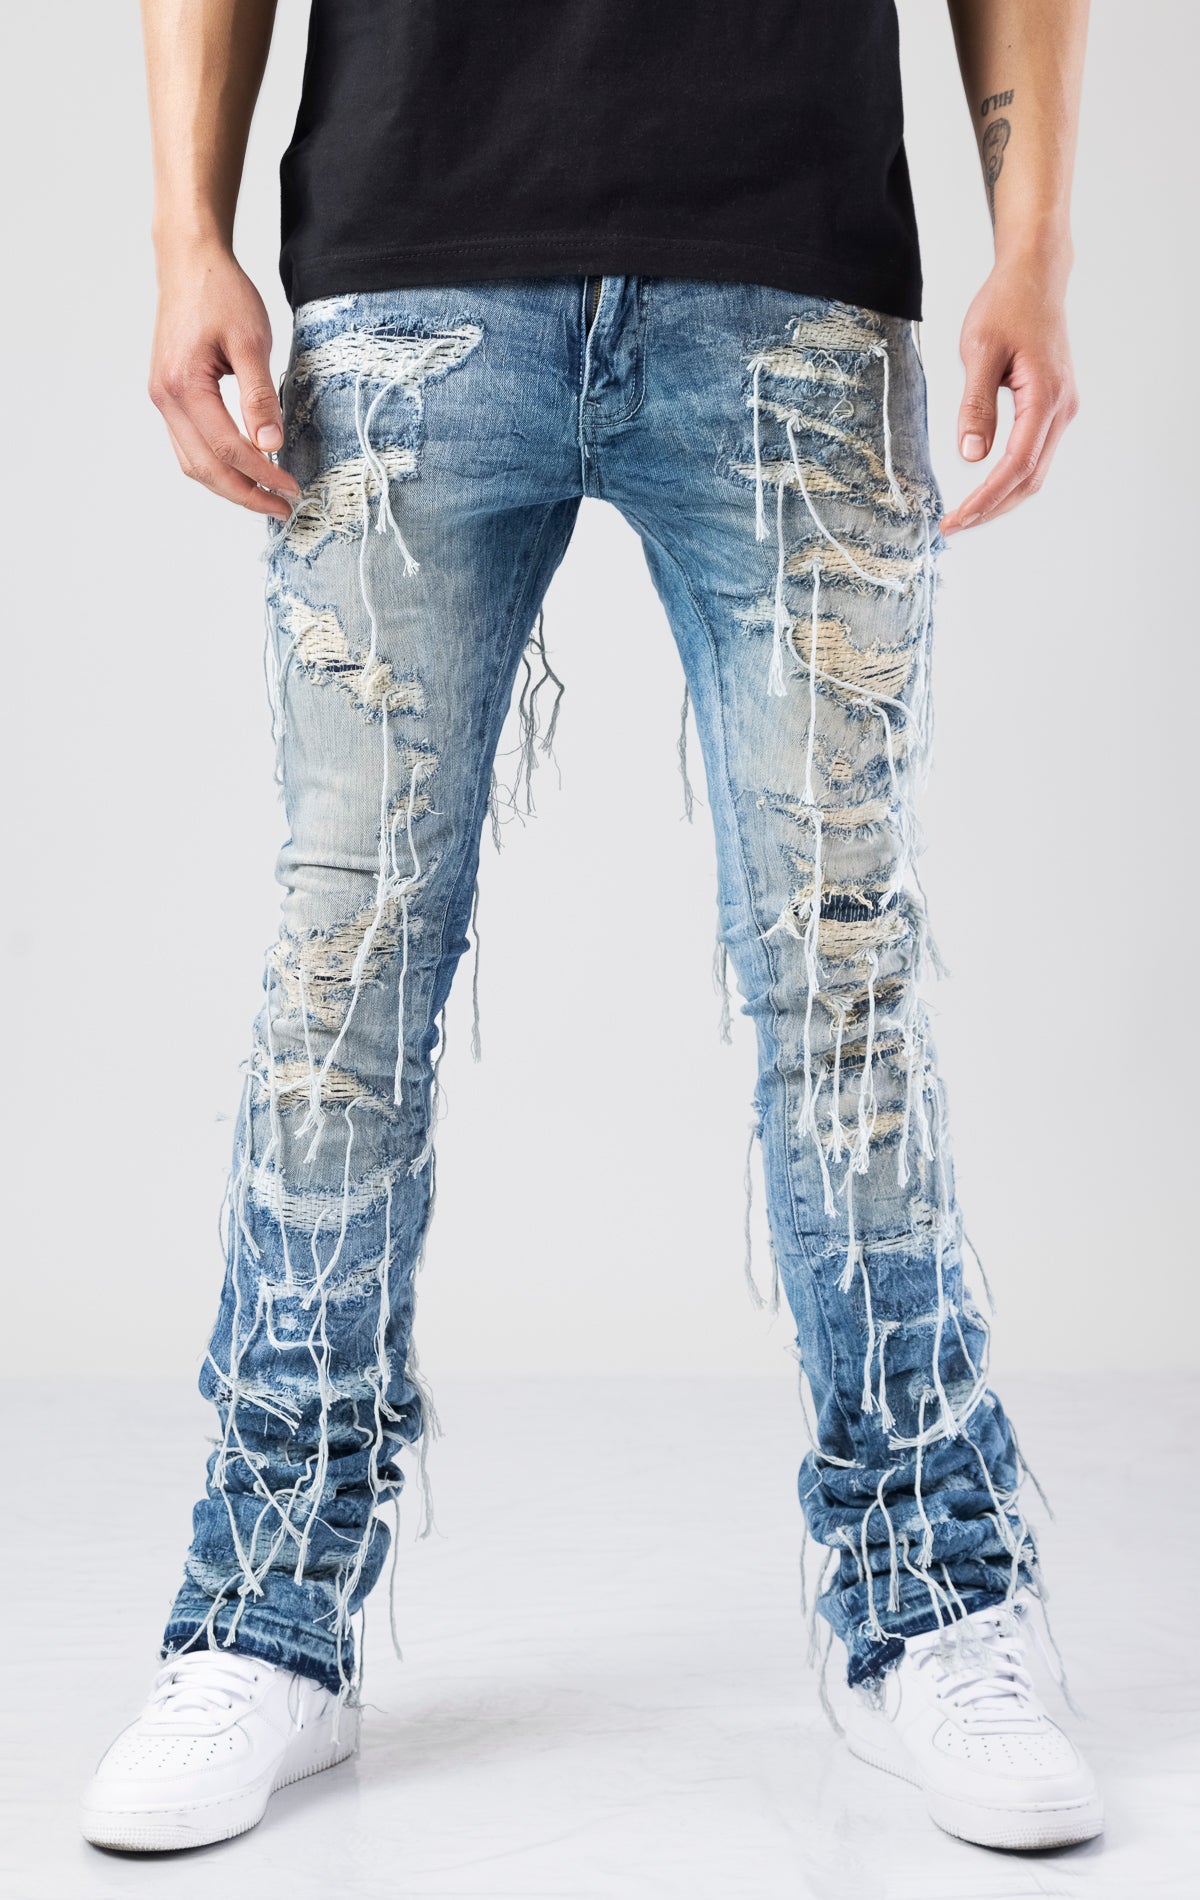 Slim fit jeans with a regular rise and tapered from the knee to the ankle. Features heavy shredding throughout with a hanging weft, rip, and repair design.